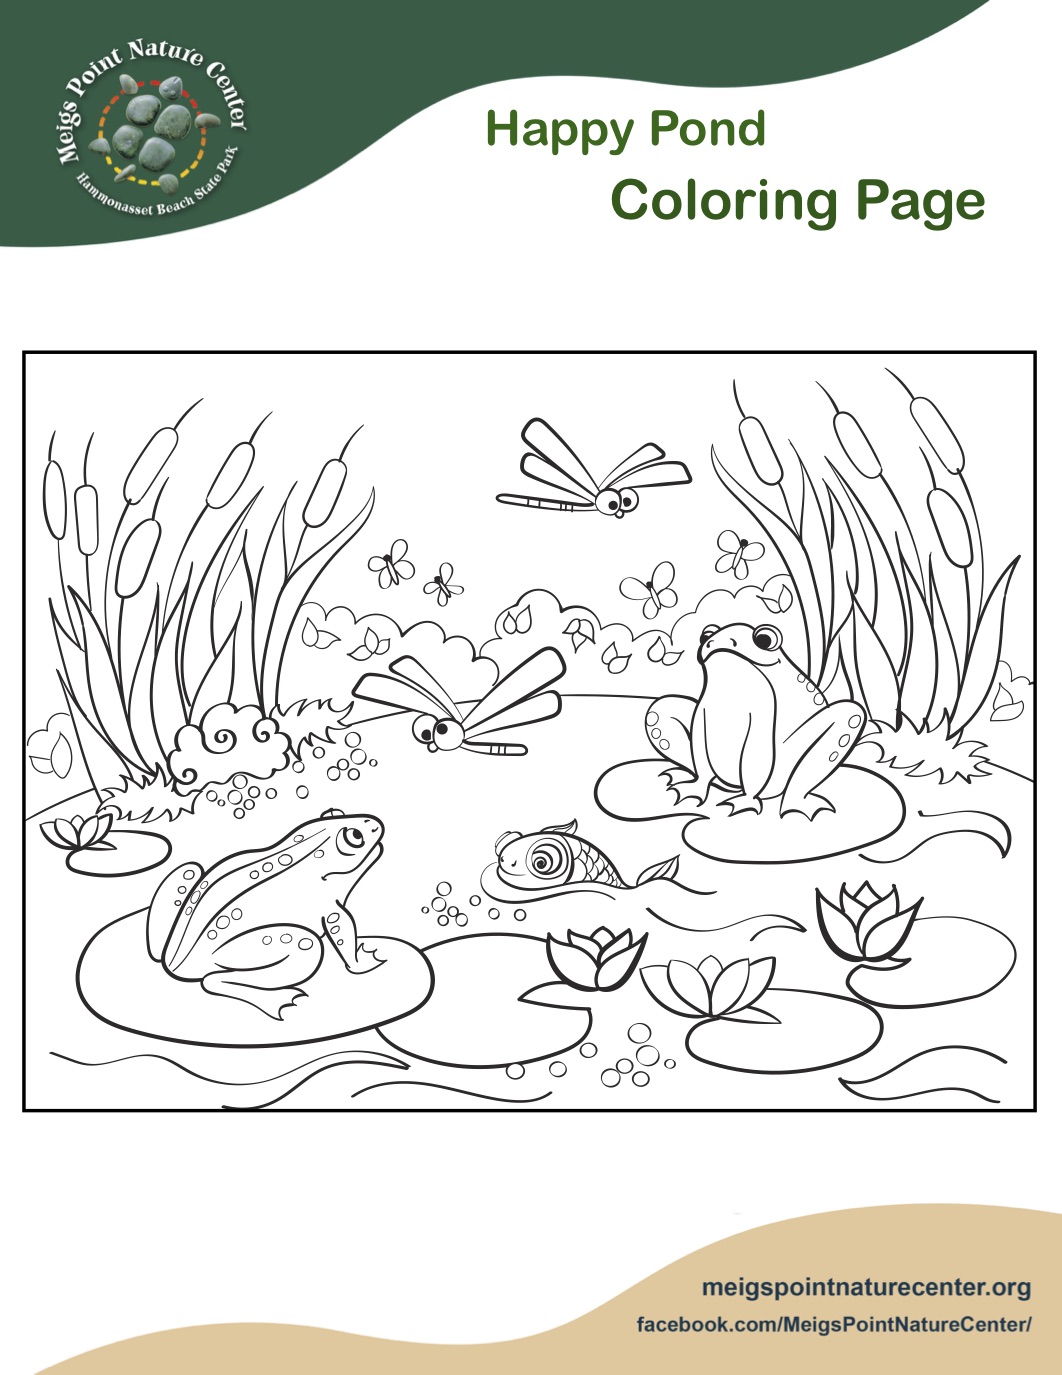 Frogs in pond coloring page